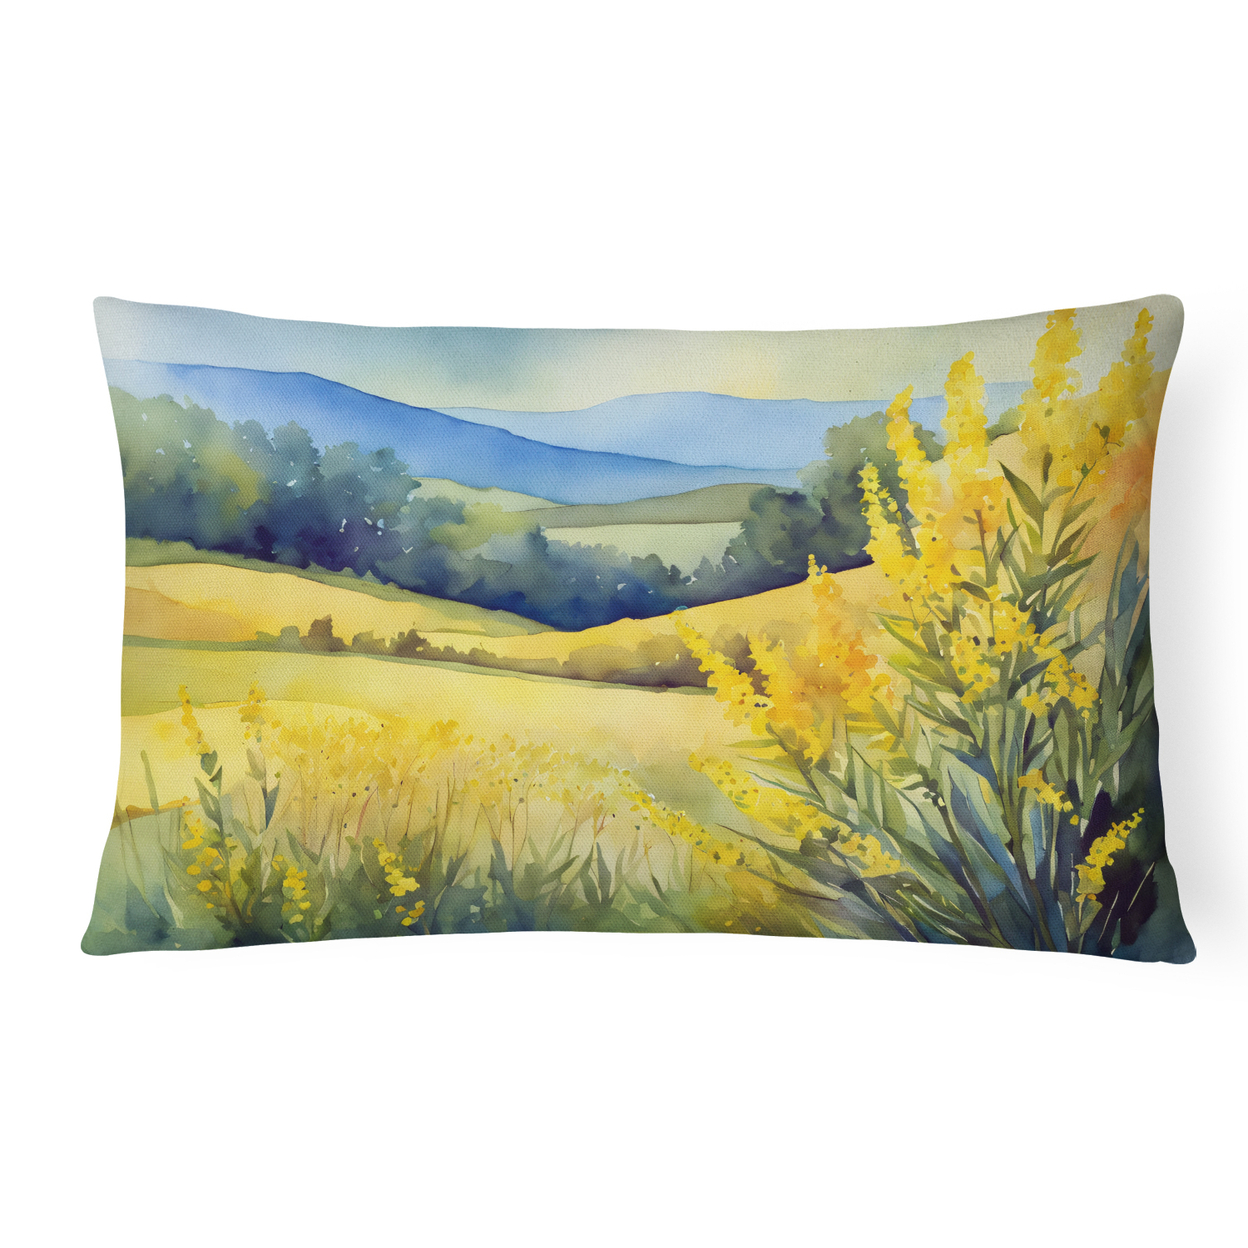 Kentucky Goldenrod in Watercolor Fabric Decorative Pillow 12 in x 16 in - image 1 of 4